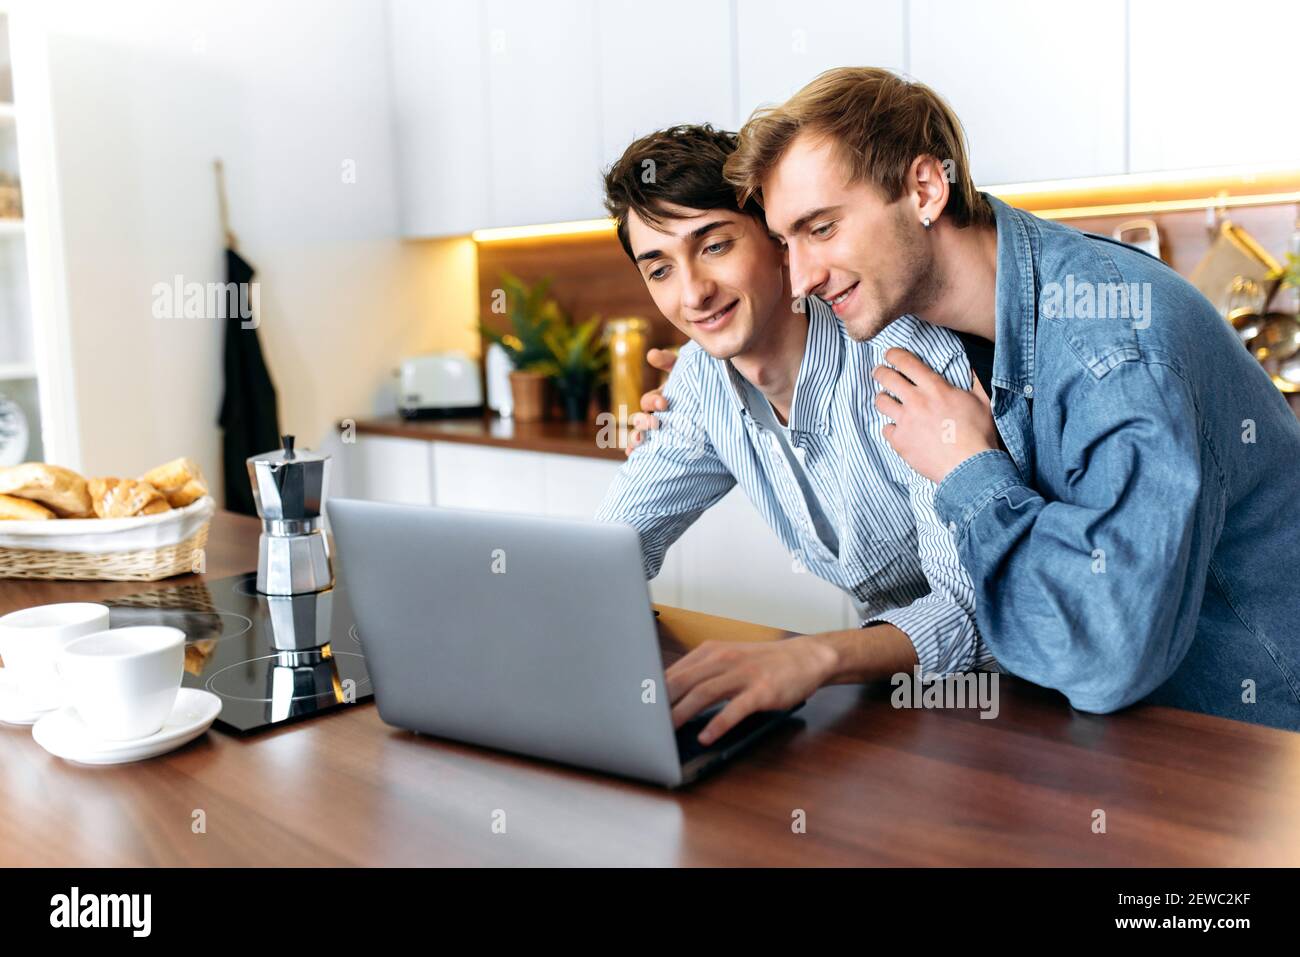 two-happy-homosexual-guys-gay-couple-standing-at-the-kitchen-use-a-laptop-browse-the-internet-watch-a-movie-shopping-online-spend-time-together-2EWC2KF.jpg